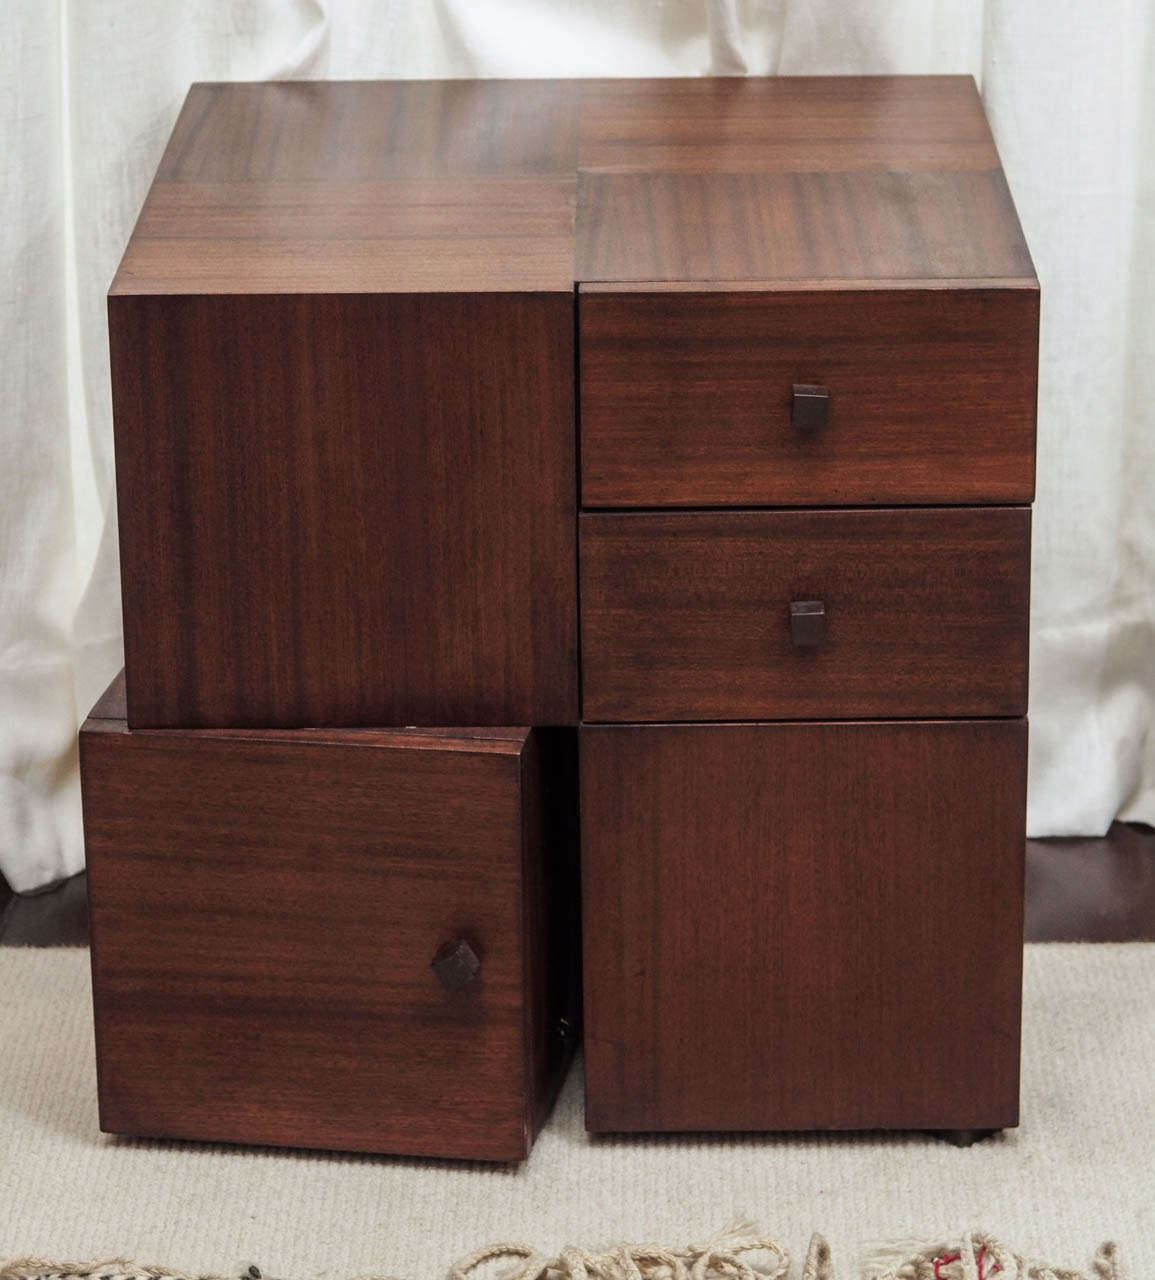 Two storage tables in hardwoods with mahogany veneers by Antoine Proulx; each with two drawers and one cabinet; the lower cabinet is fixed at an outward cant and does not pivot; bronze pulls